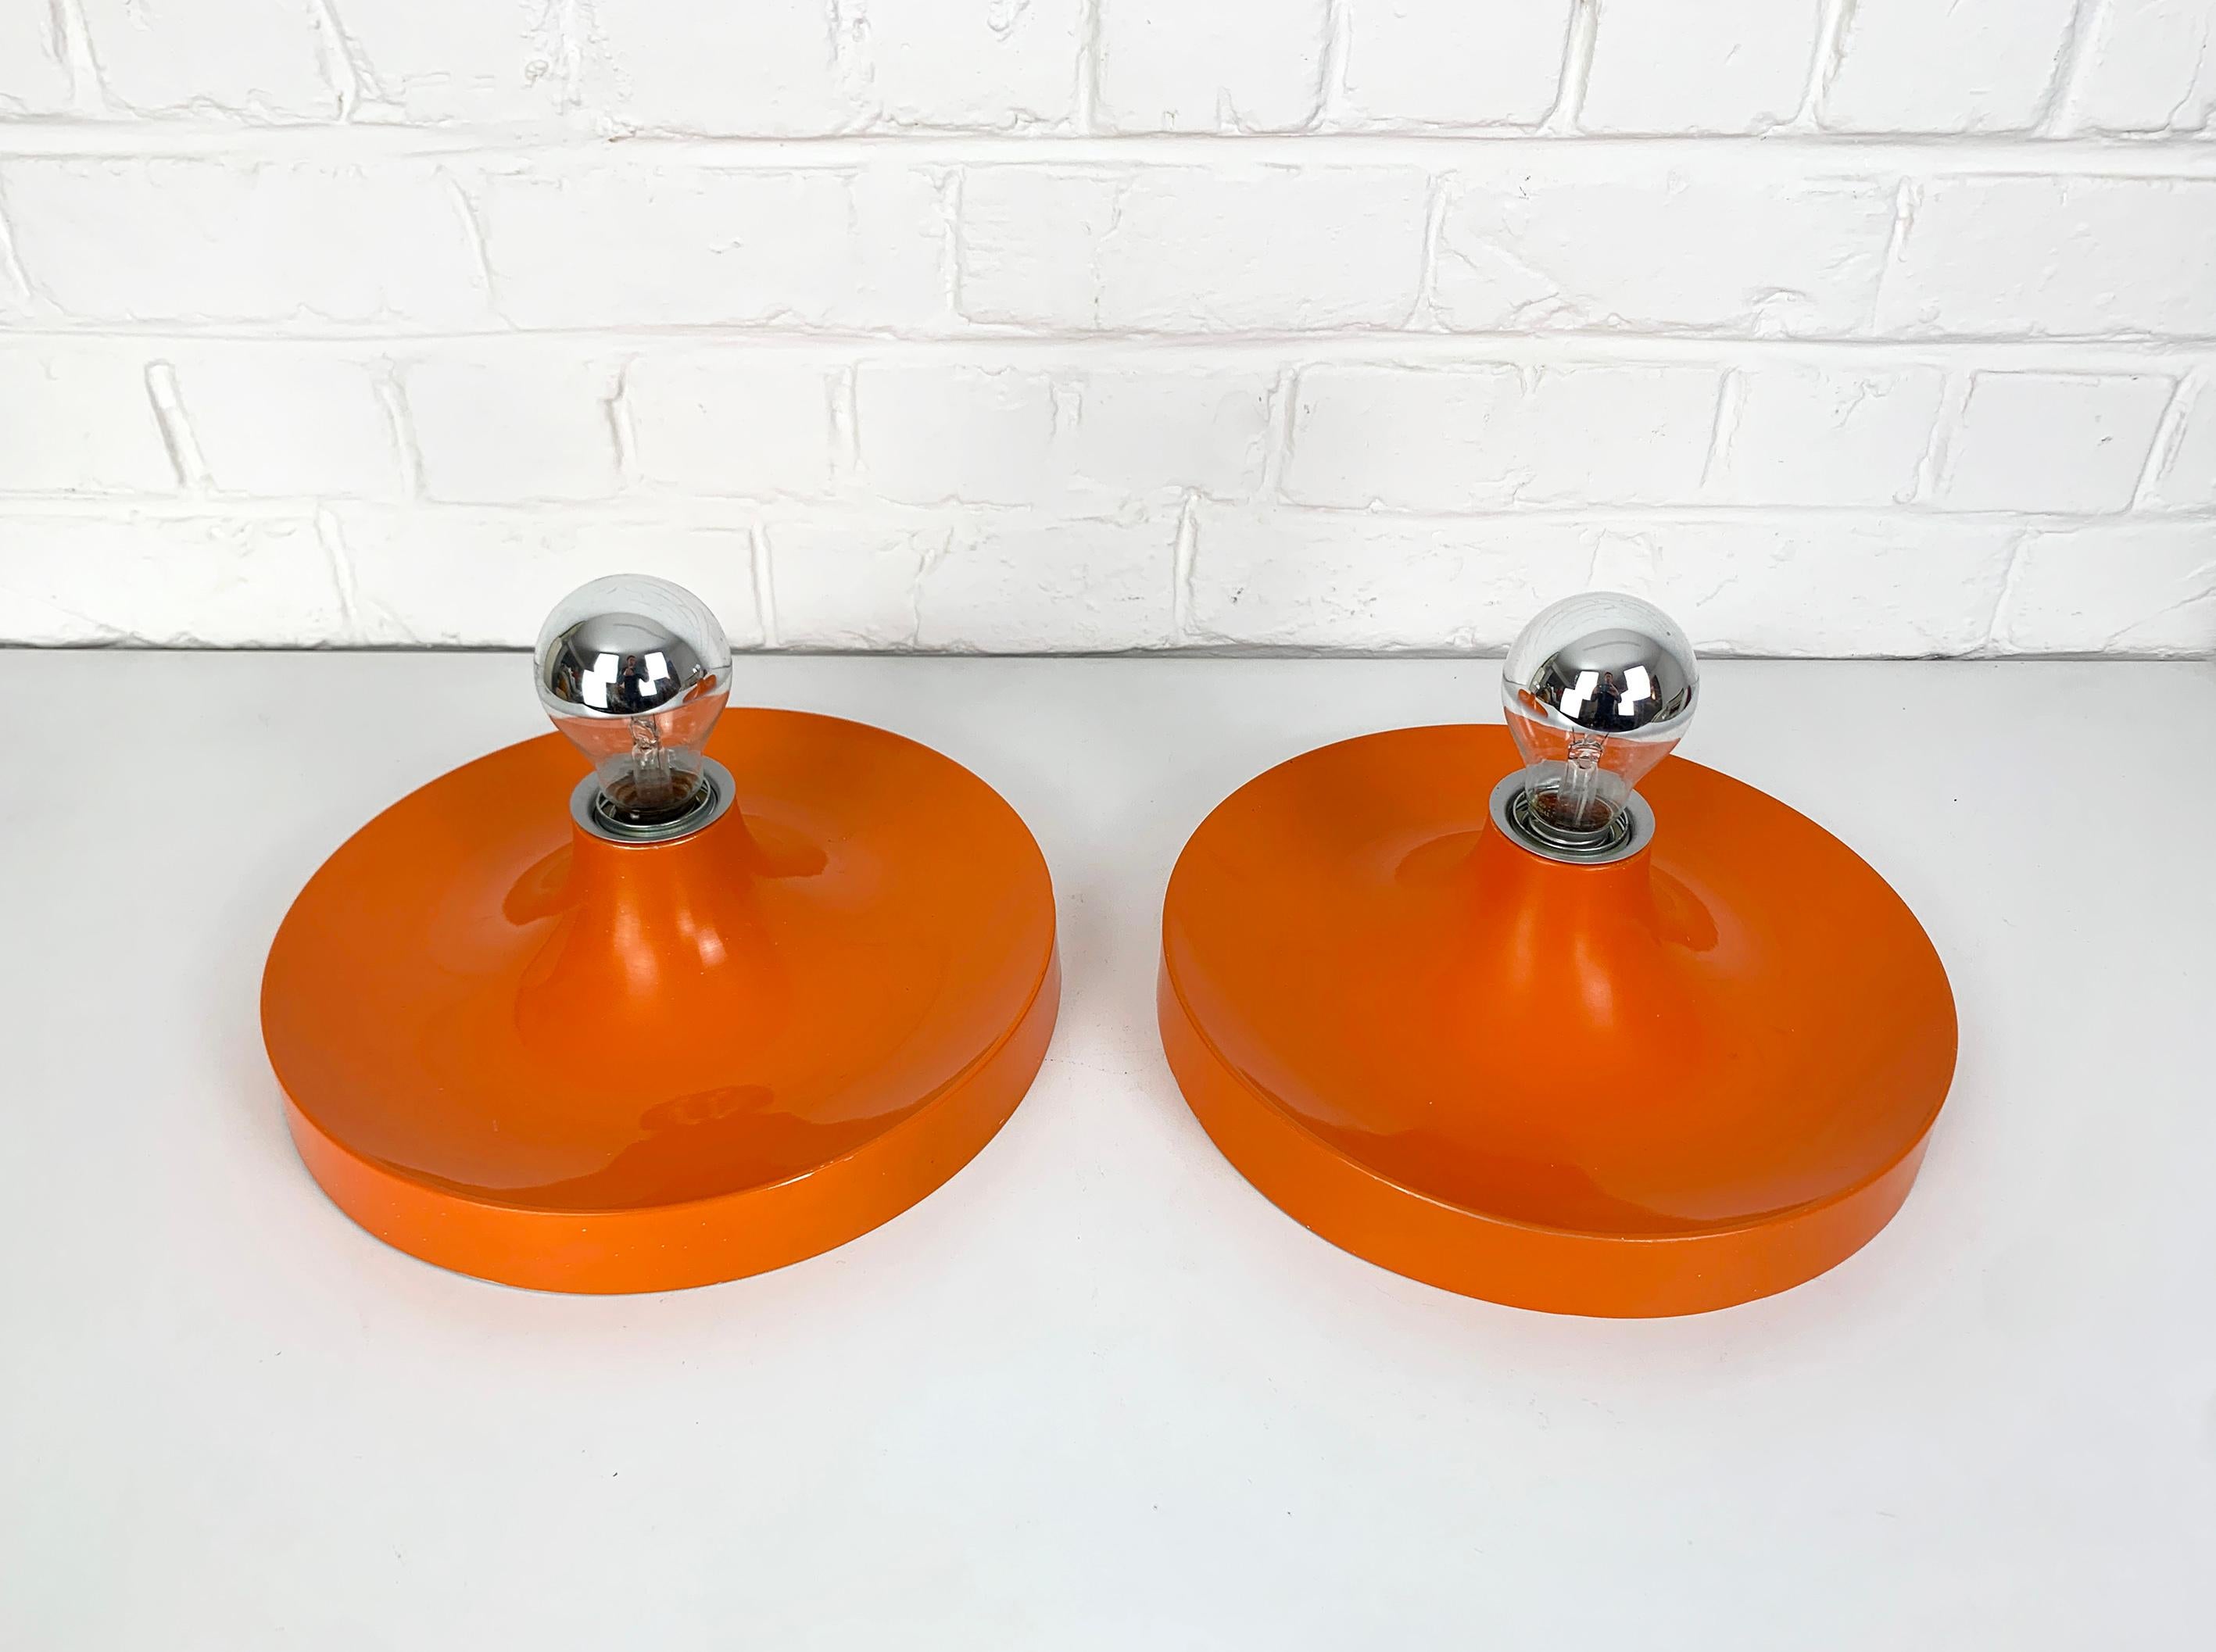 Pair of Space Age Flush lights from the 1960s, manufactured by Teka in Germany (labeled). 

These lights were commissioned / selected by Charlotte Perriand for the interior design of the flats of the 'Les Arcs' and Méribel Ski Resorts in the French